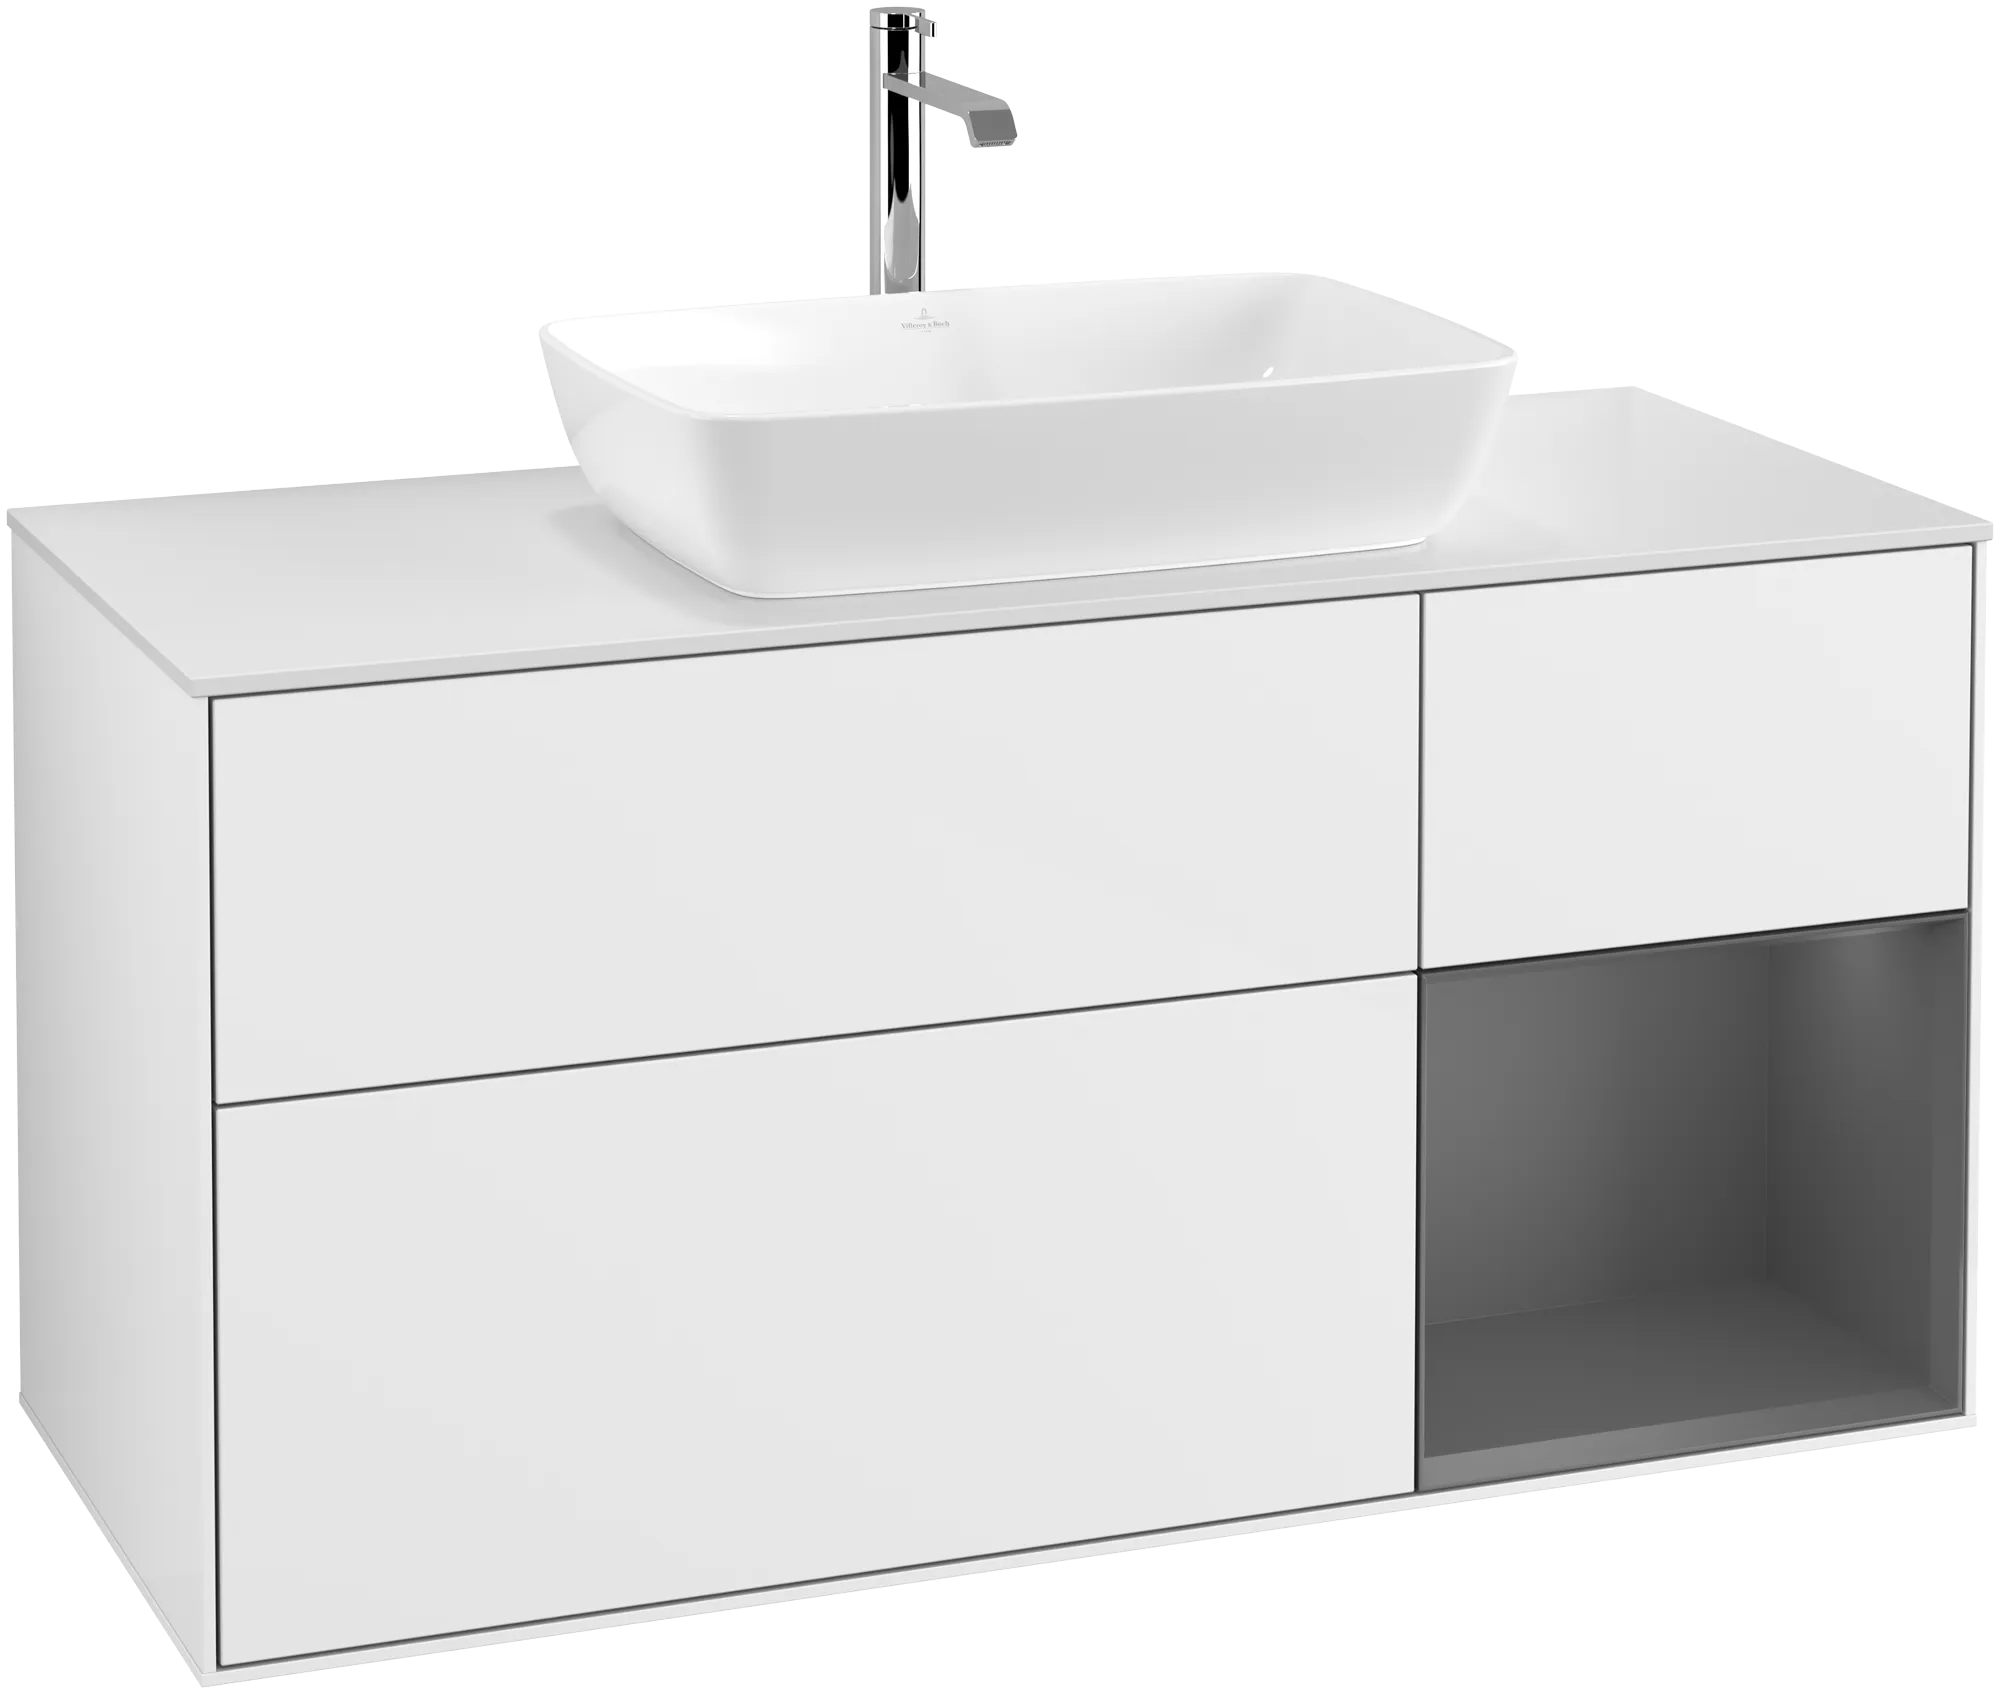 Picture of VILLEROY BOCH Finion Vanity unit, with lighting, 3 pull-out compartments, 1200 x 603 x 501 mm, Glossy White Lacquer / Anthracite Matt Lacquer / Glass White Matt #G831GKGF